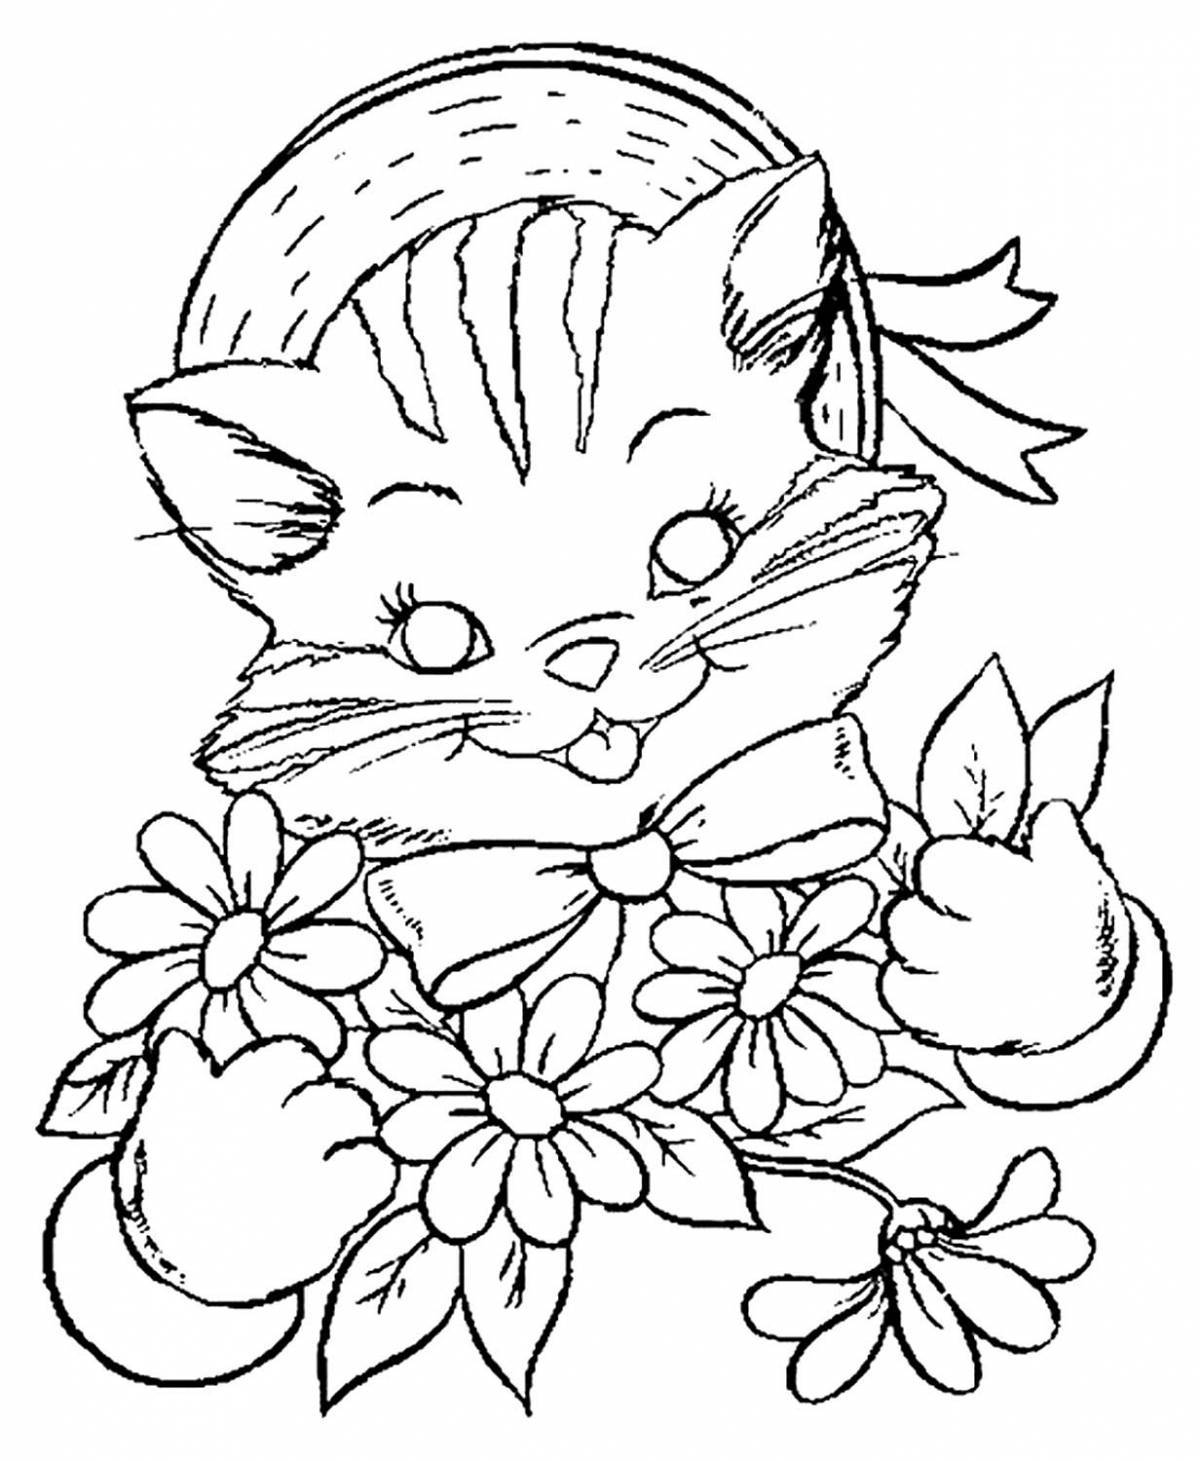 Adorable kitty coloring book for girls